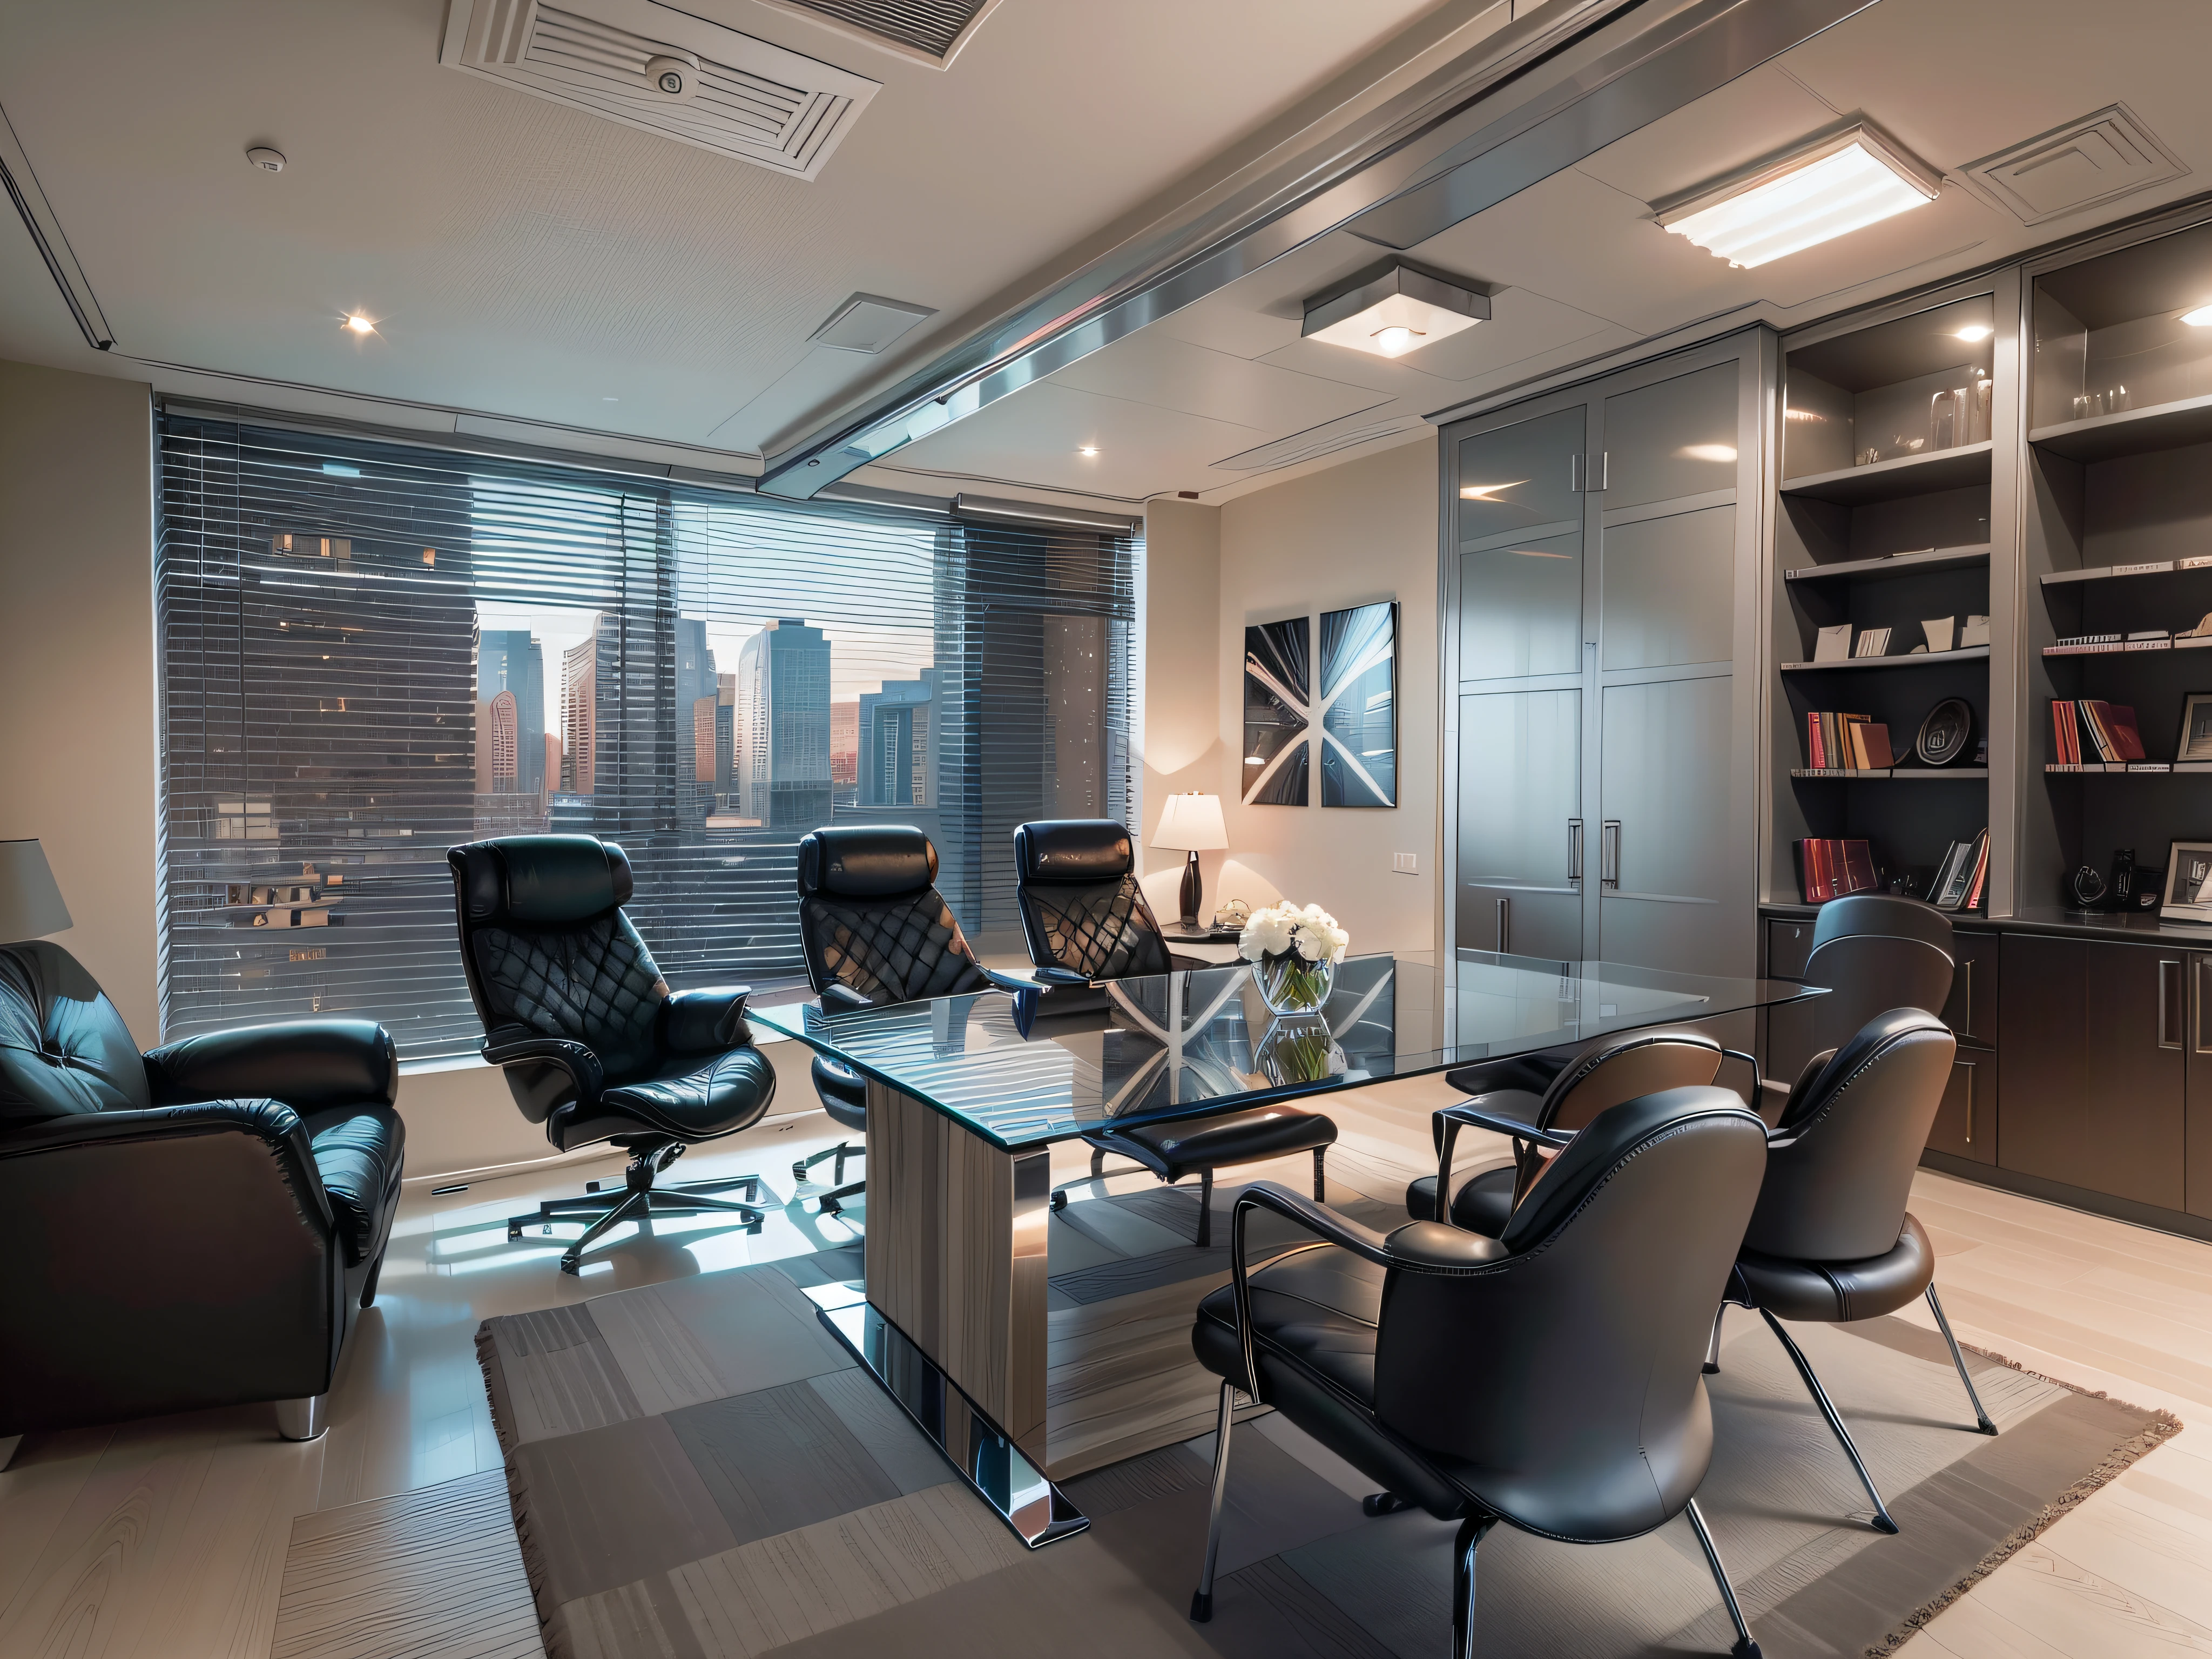 The law firm features contemporary design furniture, including armchairs upholstered in black and gray leather, tempered glass coffee tables with chrome bases, a solid wood meeting table with black leather chairs, and a built-in bookcase with brown leather bound legal books.